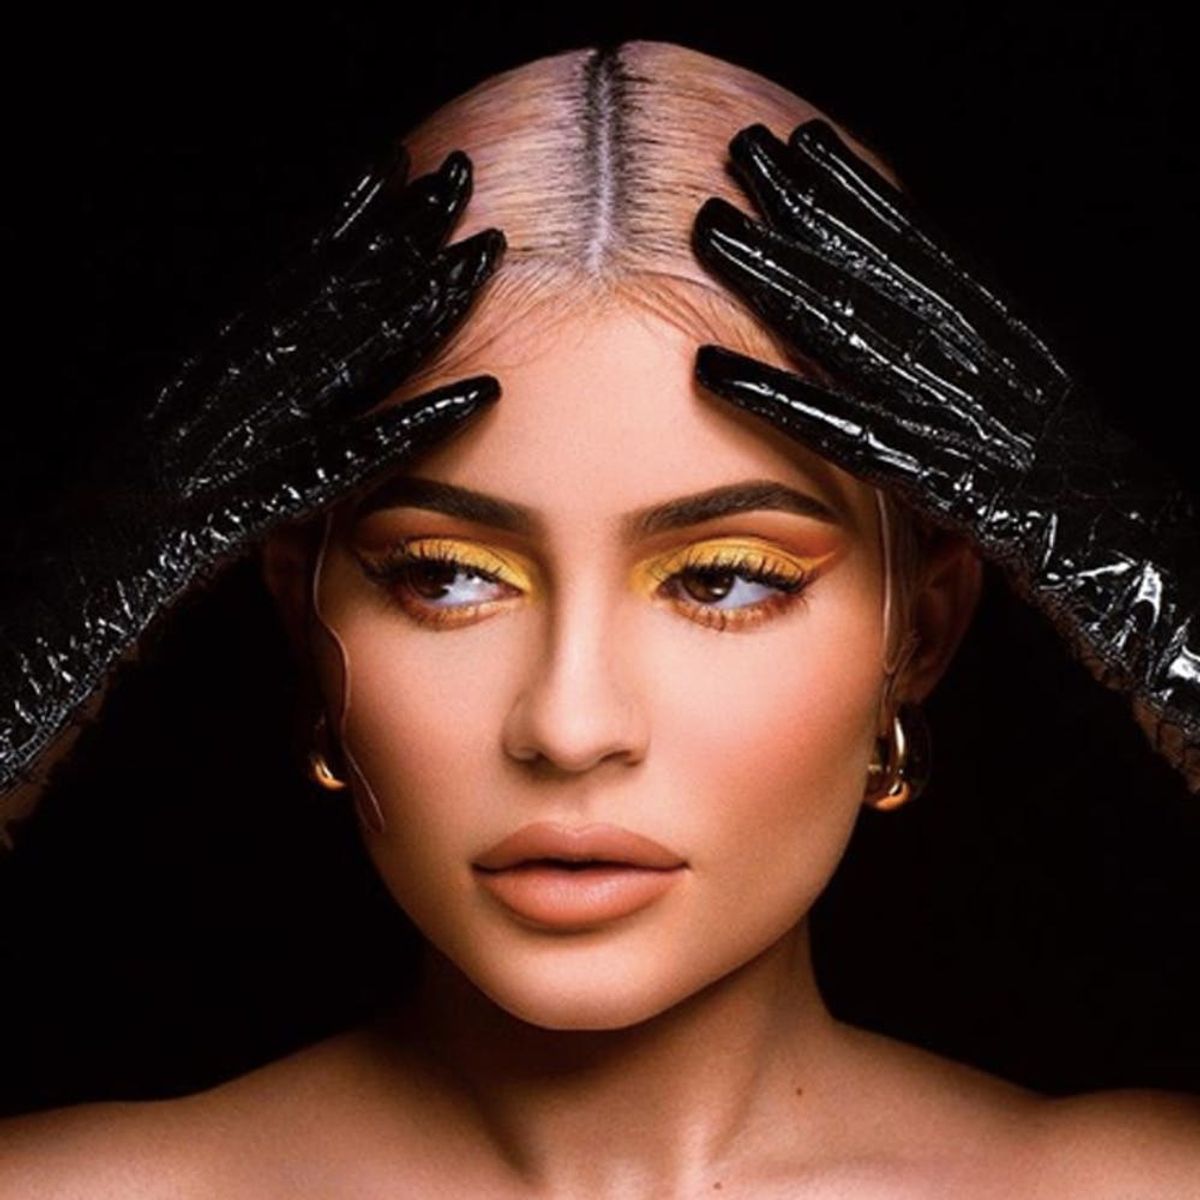 Kylie Jenner Launches Halloween Makeup Collection and… Here’s Our Credit Card